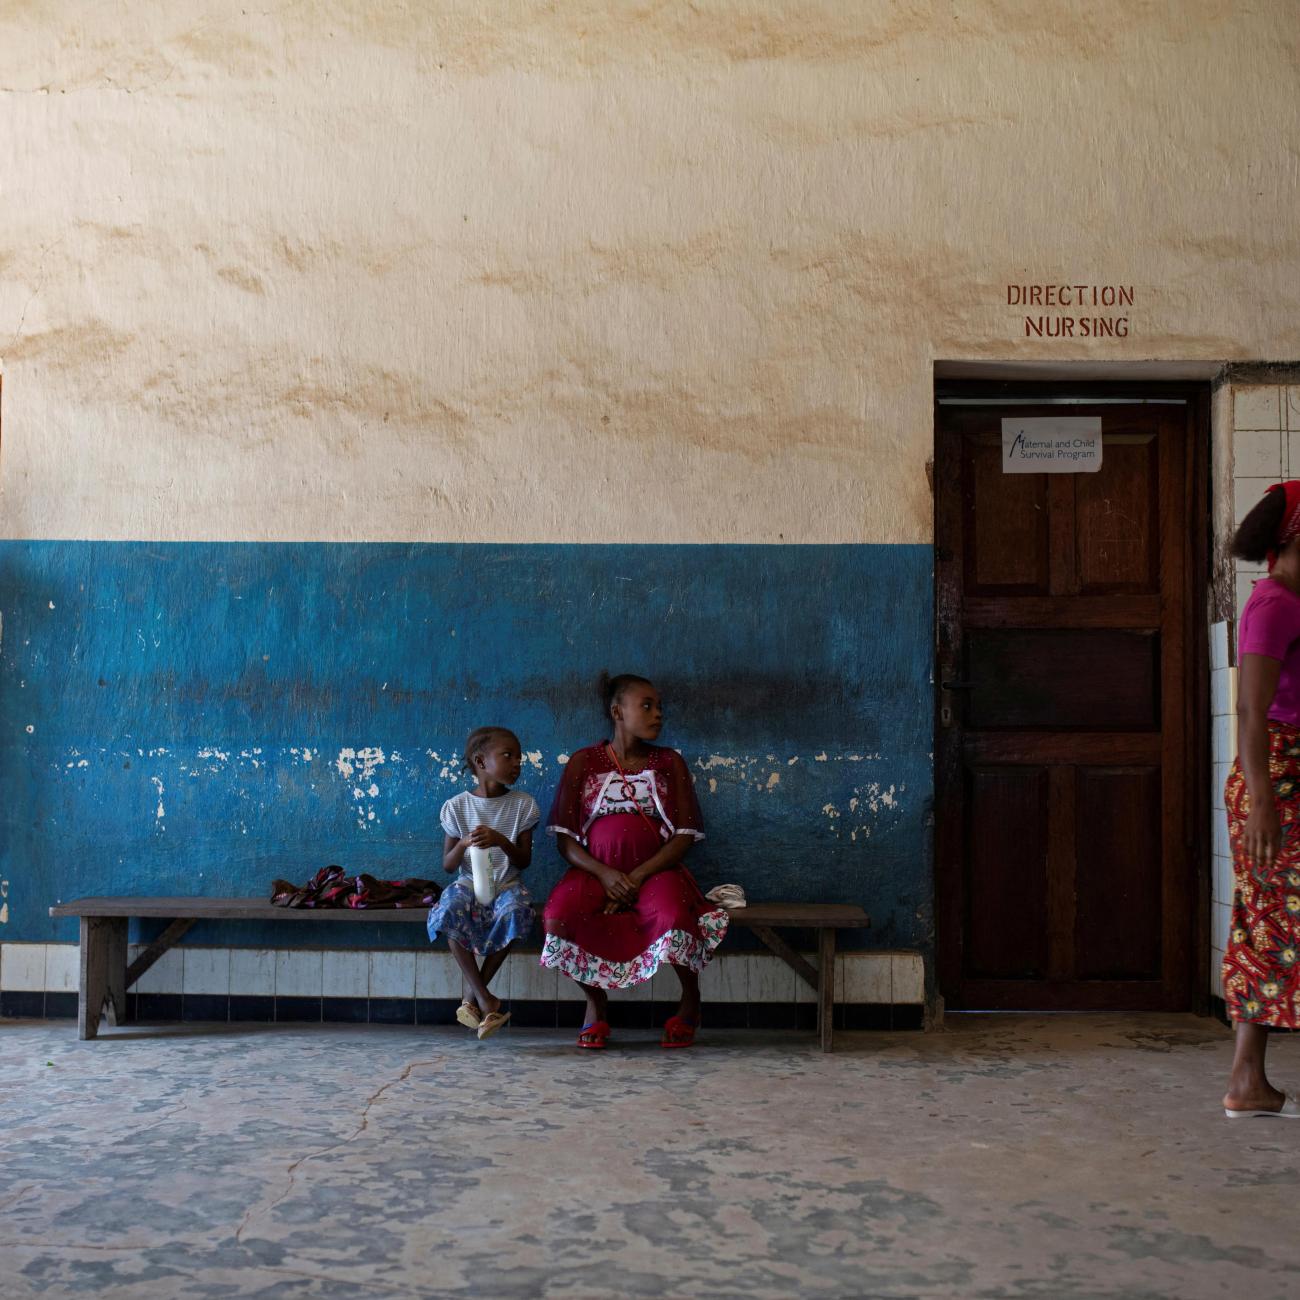 Women and their children wait for a consultation with Dr. Fabien Kongolo in the waiting area of the Yakusu General Hospital, Tshopo, Democratic Republic of Congo, October 5, 2022.